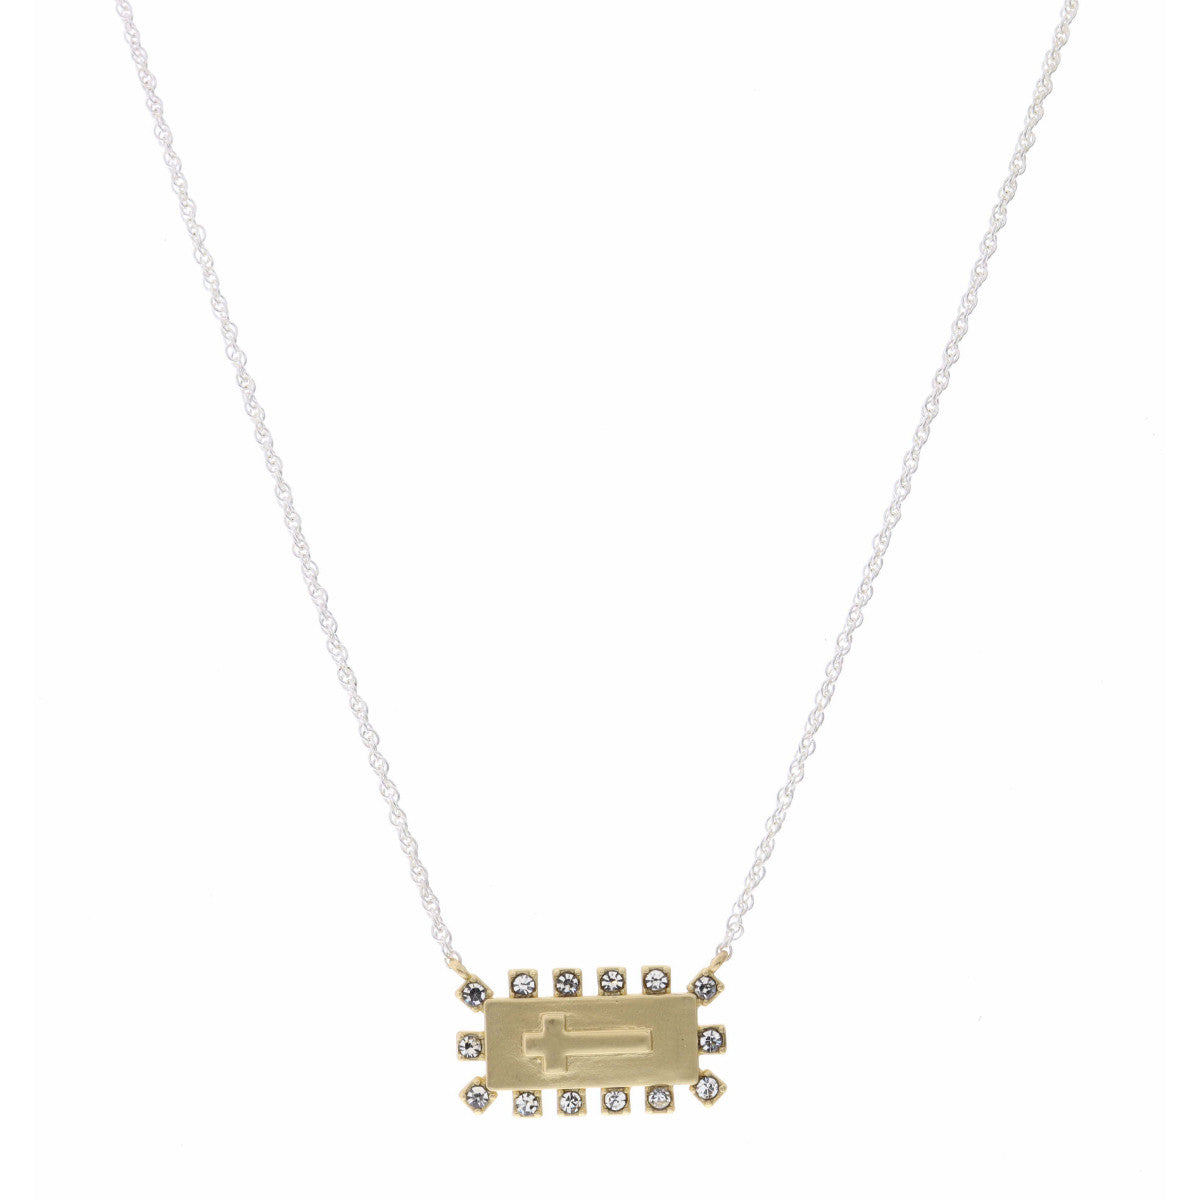 Necklace with Rectangle Pendant